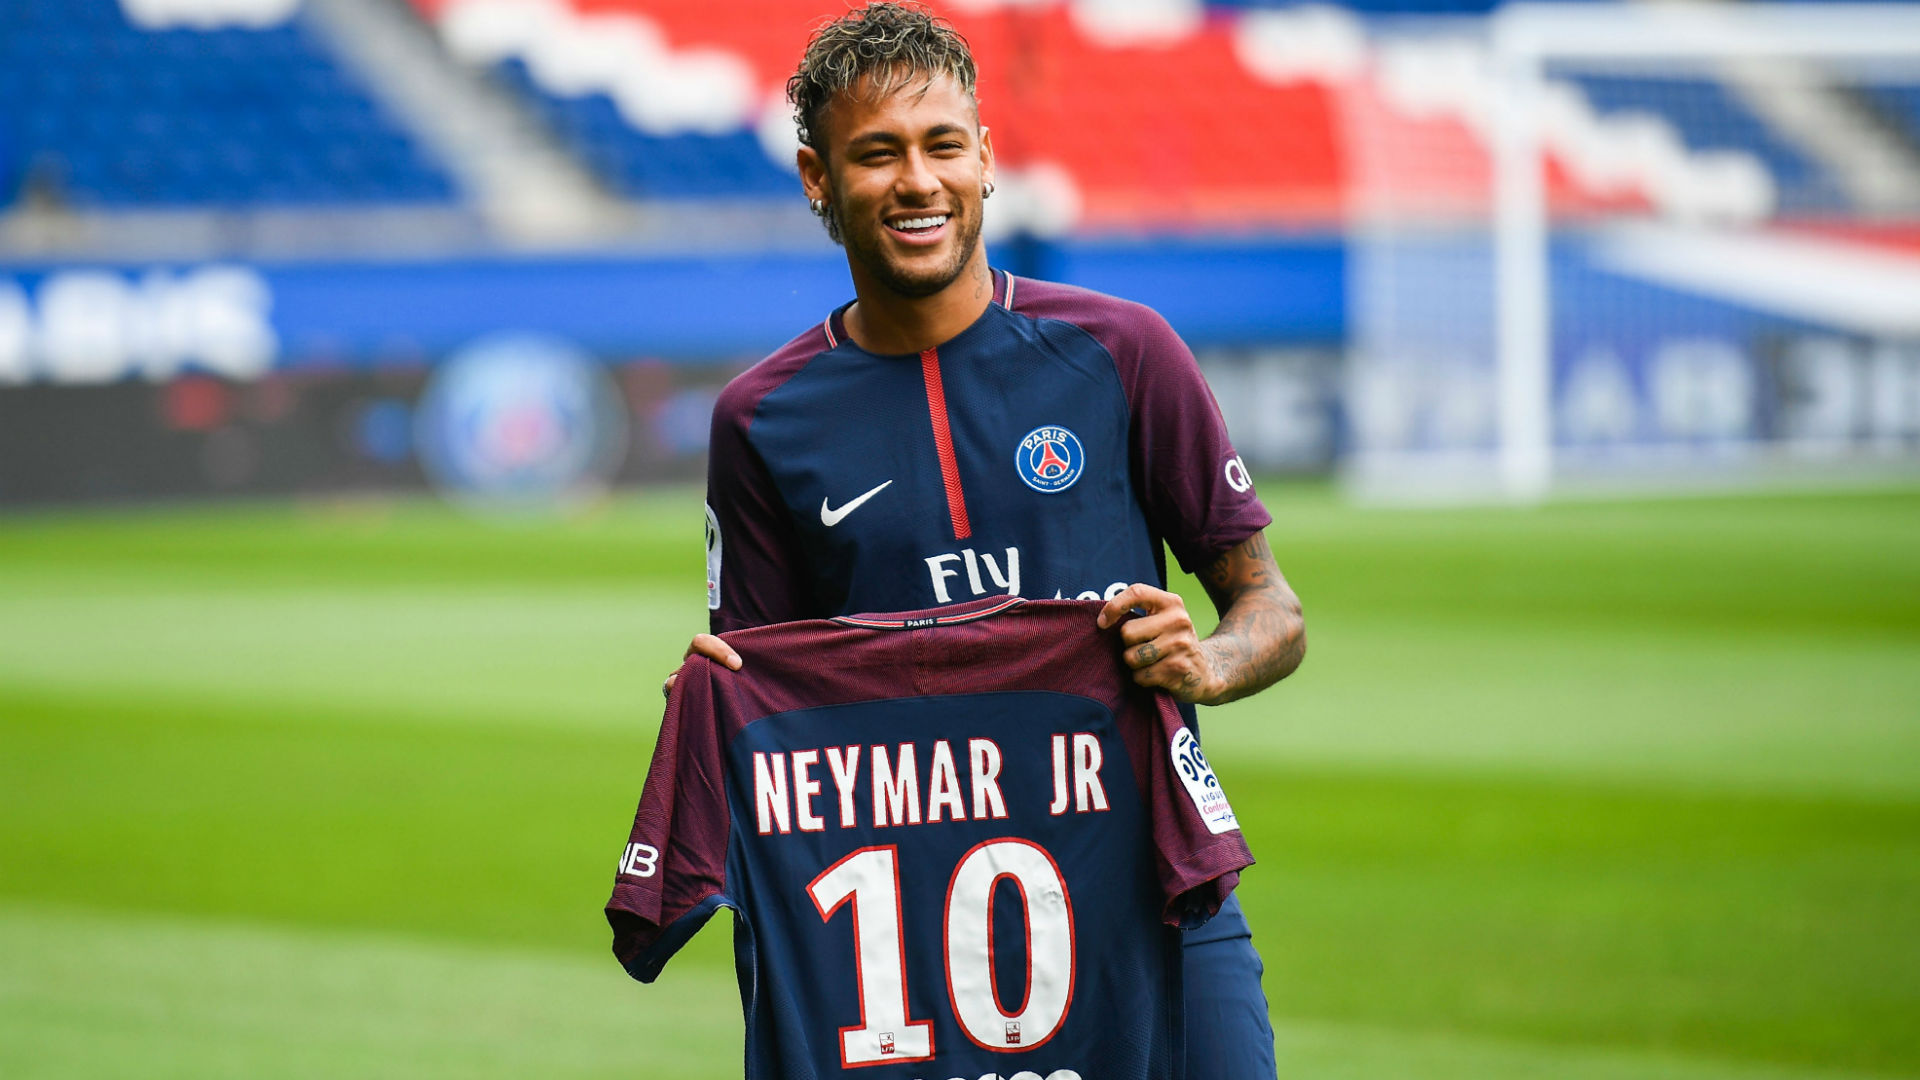 Transfer News: Manchester United linked with a sensational move for Neymar Jr.